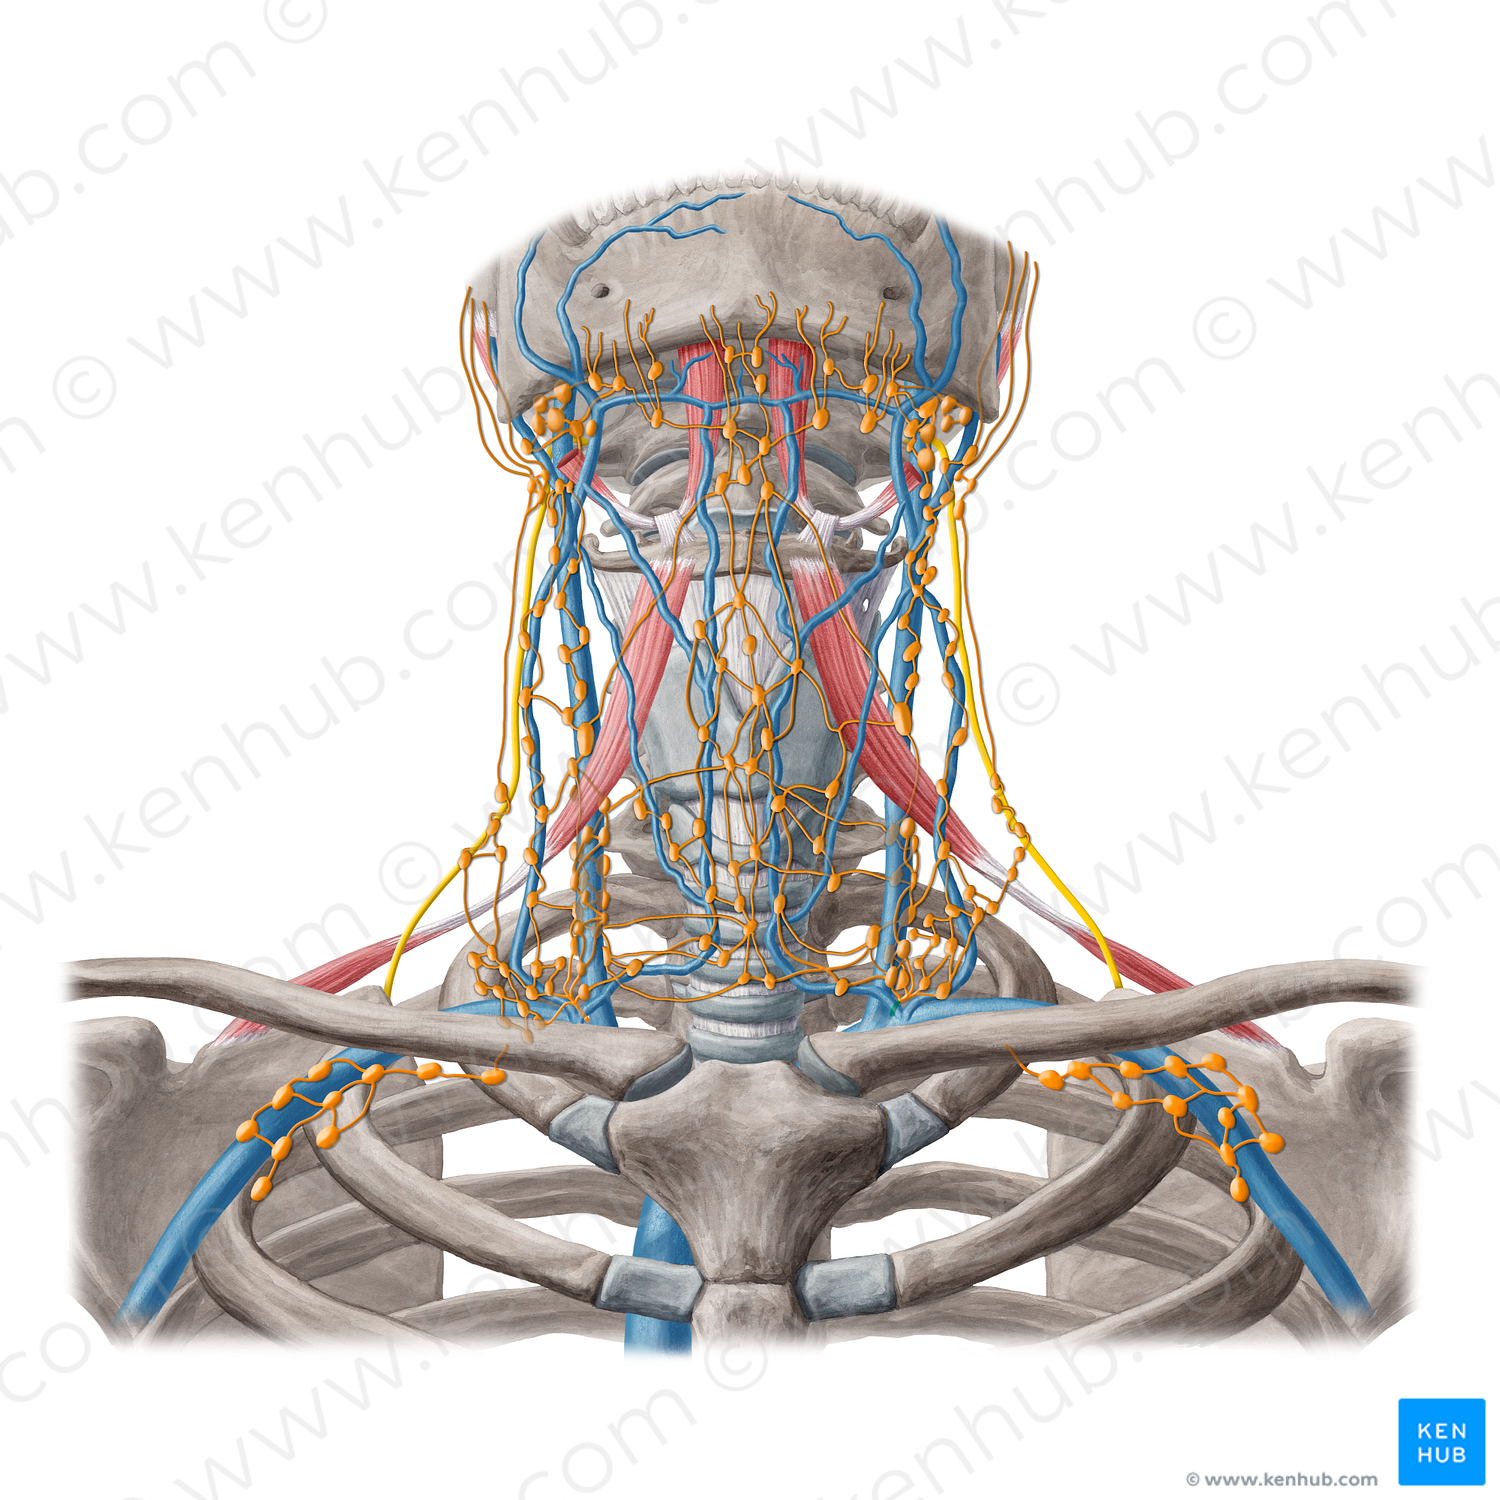 Thoracic duct (#20261)